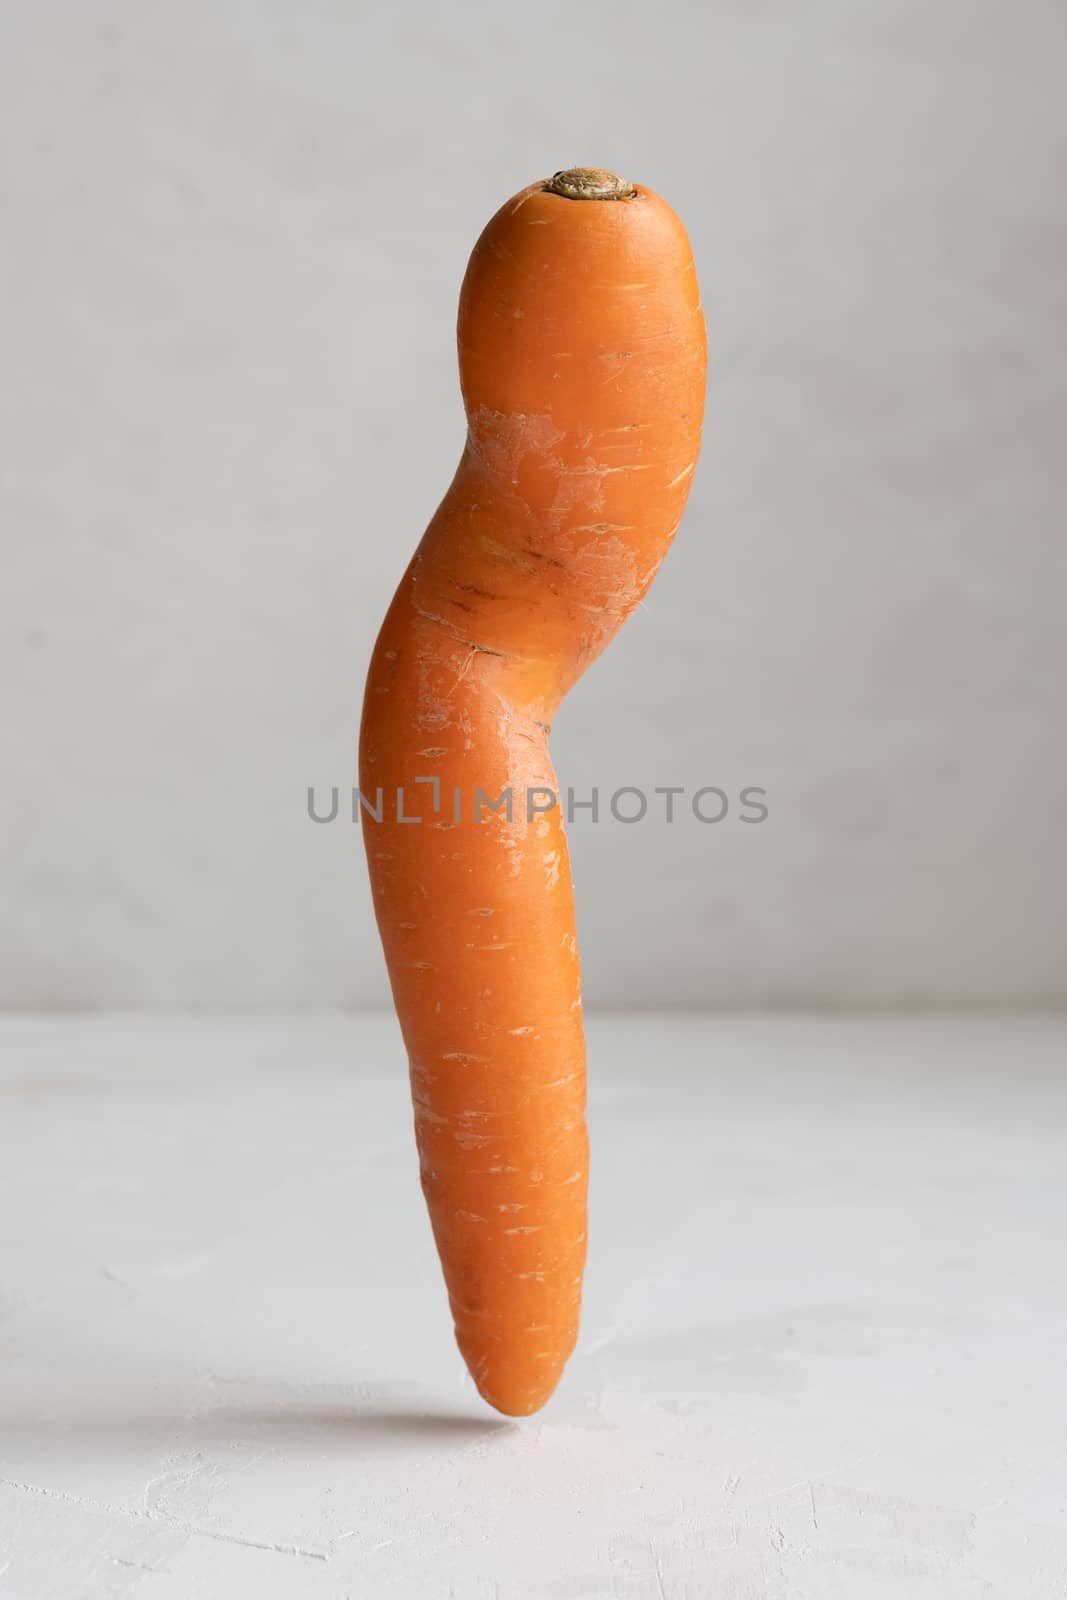 Ugly crooked carrot. Carrot isolated on white background